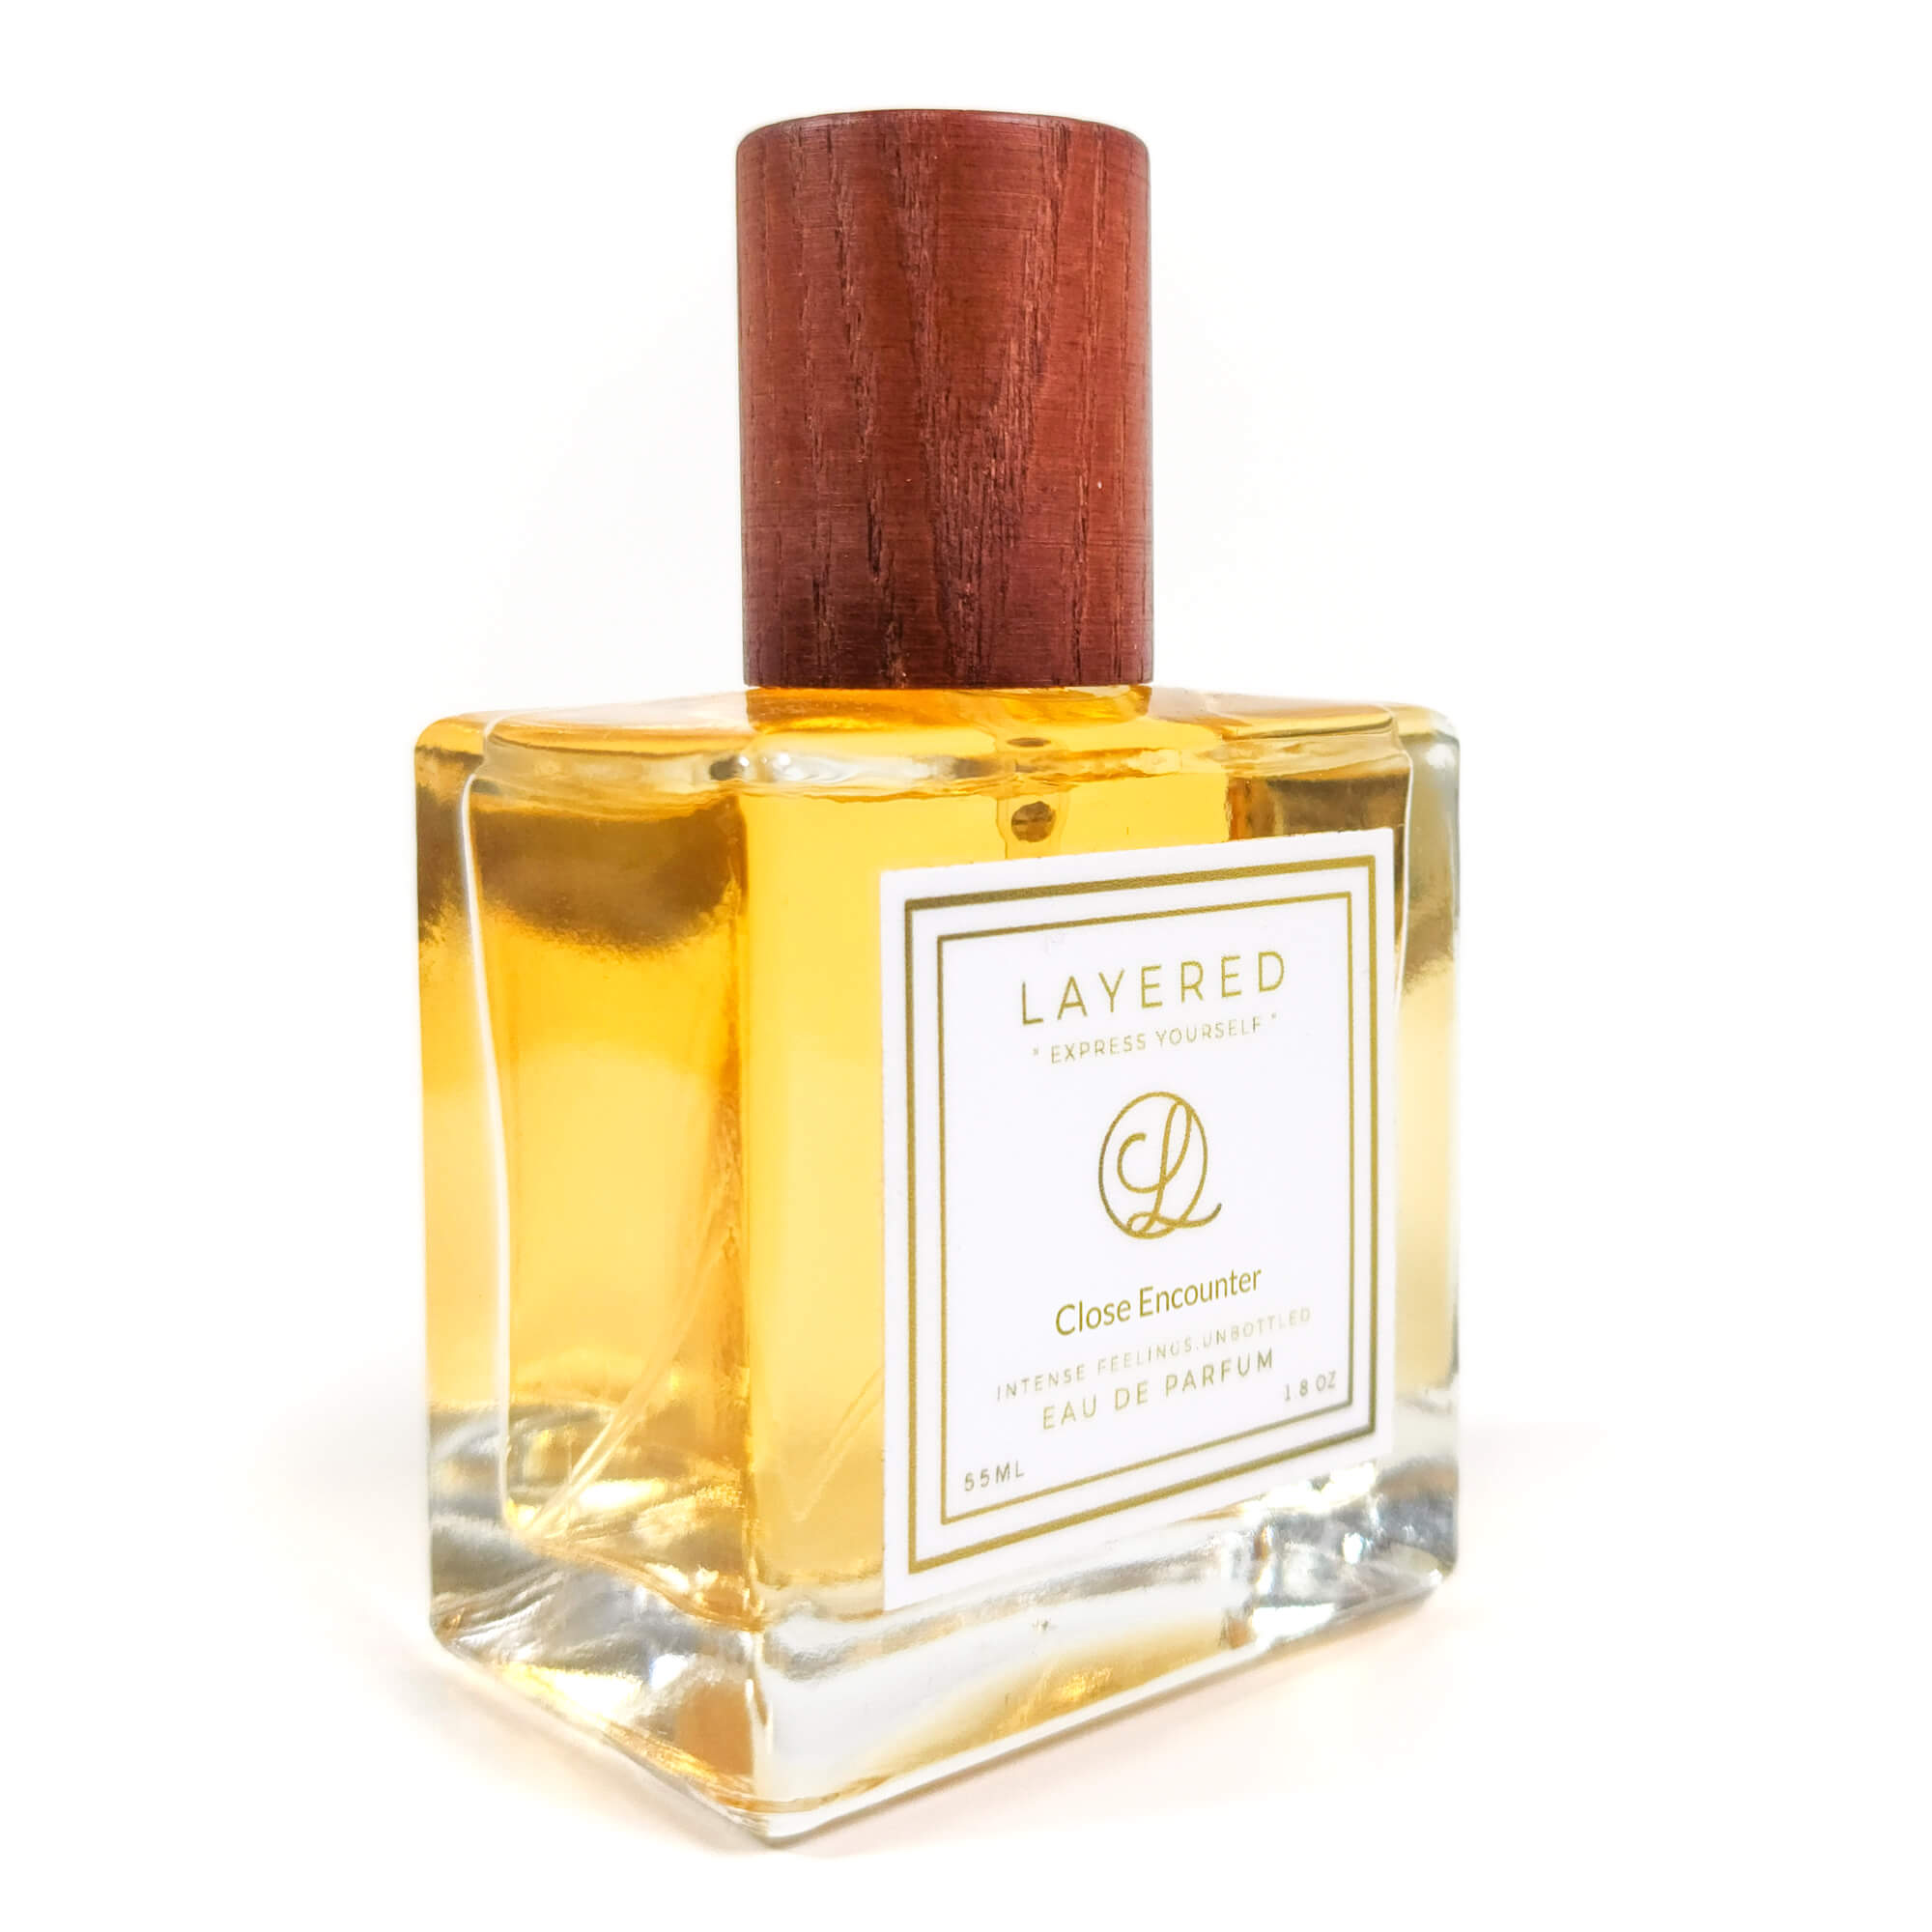 Close Encounter - A Sweet and Playful Fragrance